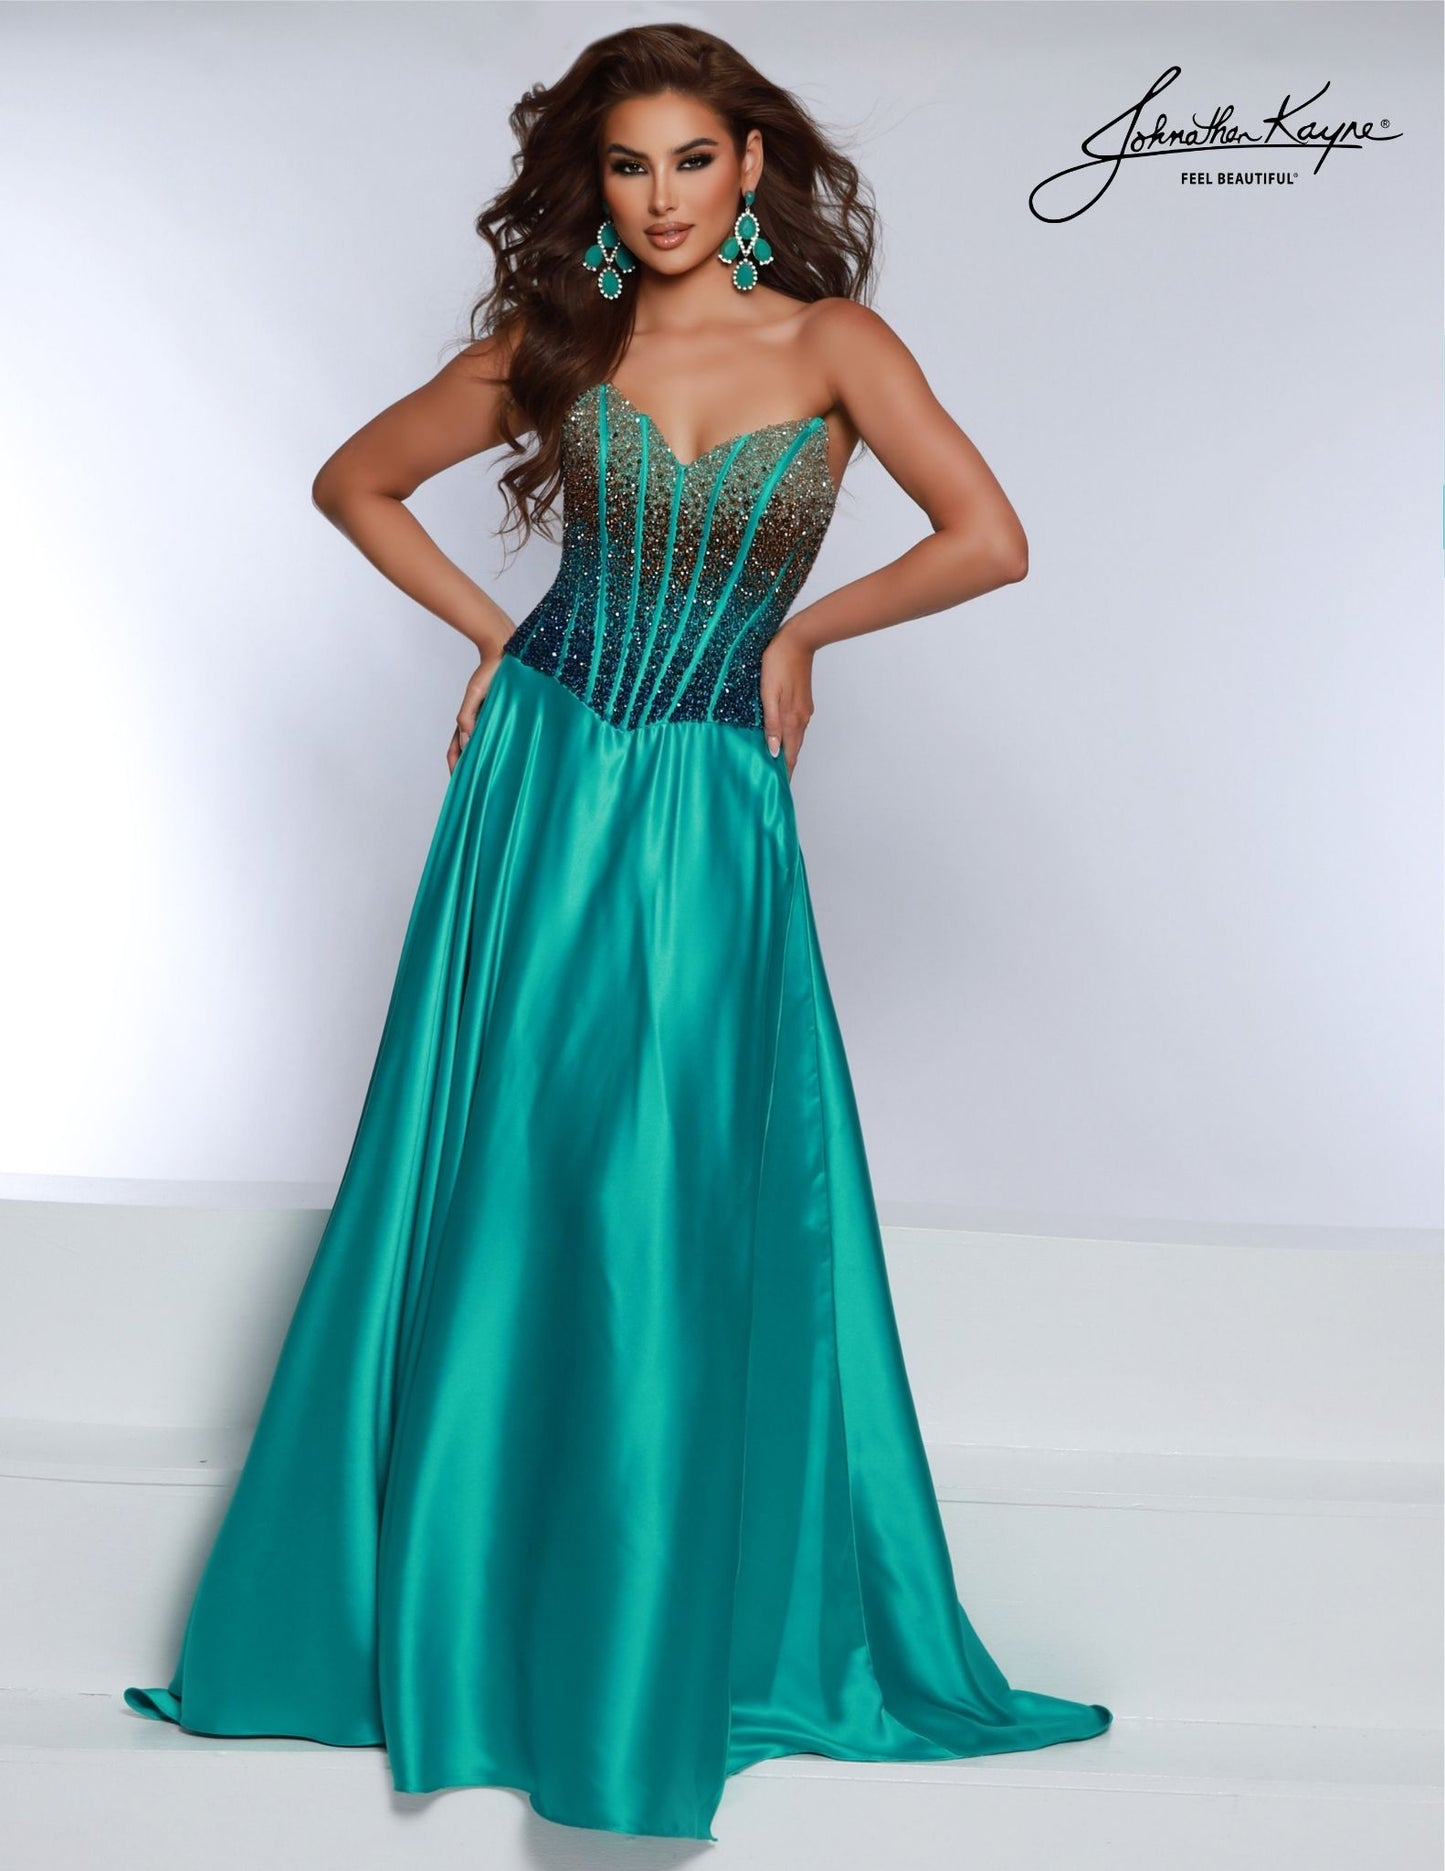 The Johnathan Kayne 2812 is a stunning A-line corset formal gown, crafted with an open back and beading to enhance your silhouette. Perfect for prom or special events, this gown will make you feel like the belle of the ball. Elevate your elegance with this breathtaking strapless ombre beaded bodice – the gradual shift in colors come together to create a show-stopping effect. The flowing A-line skirt makes this perfect for all body types. 